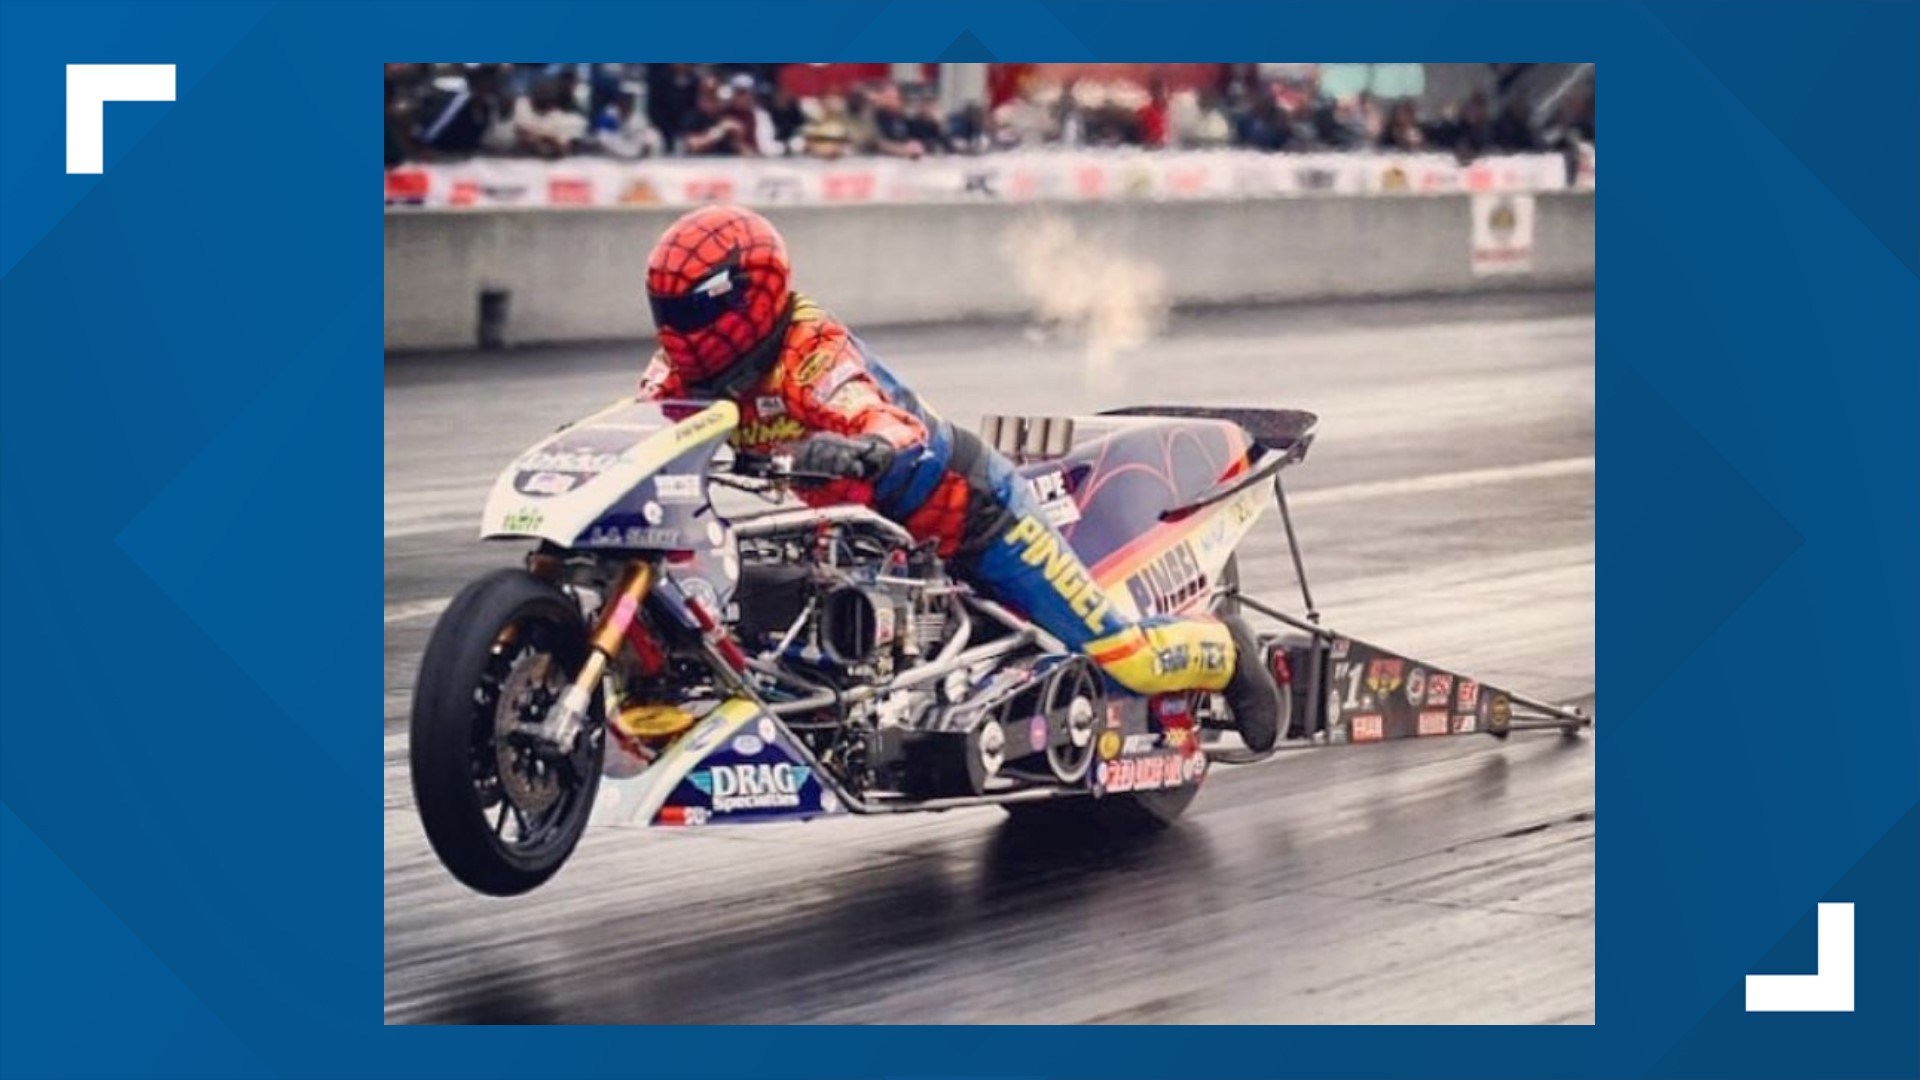 The Poquoson native broke his old quarter-mile record on a top fuel motorcycle dragster last month at the Virginia Nationals with a speed of 268 miles per hour.